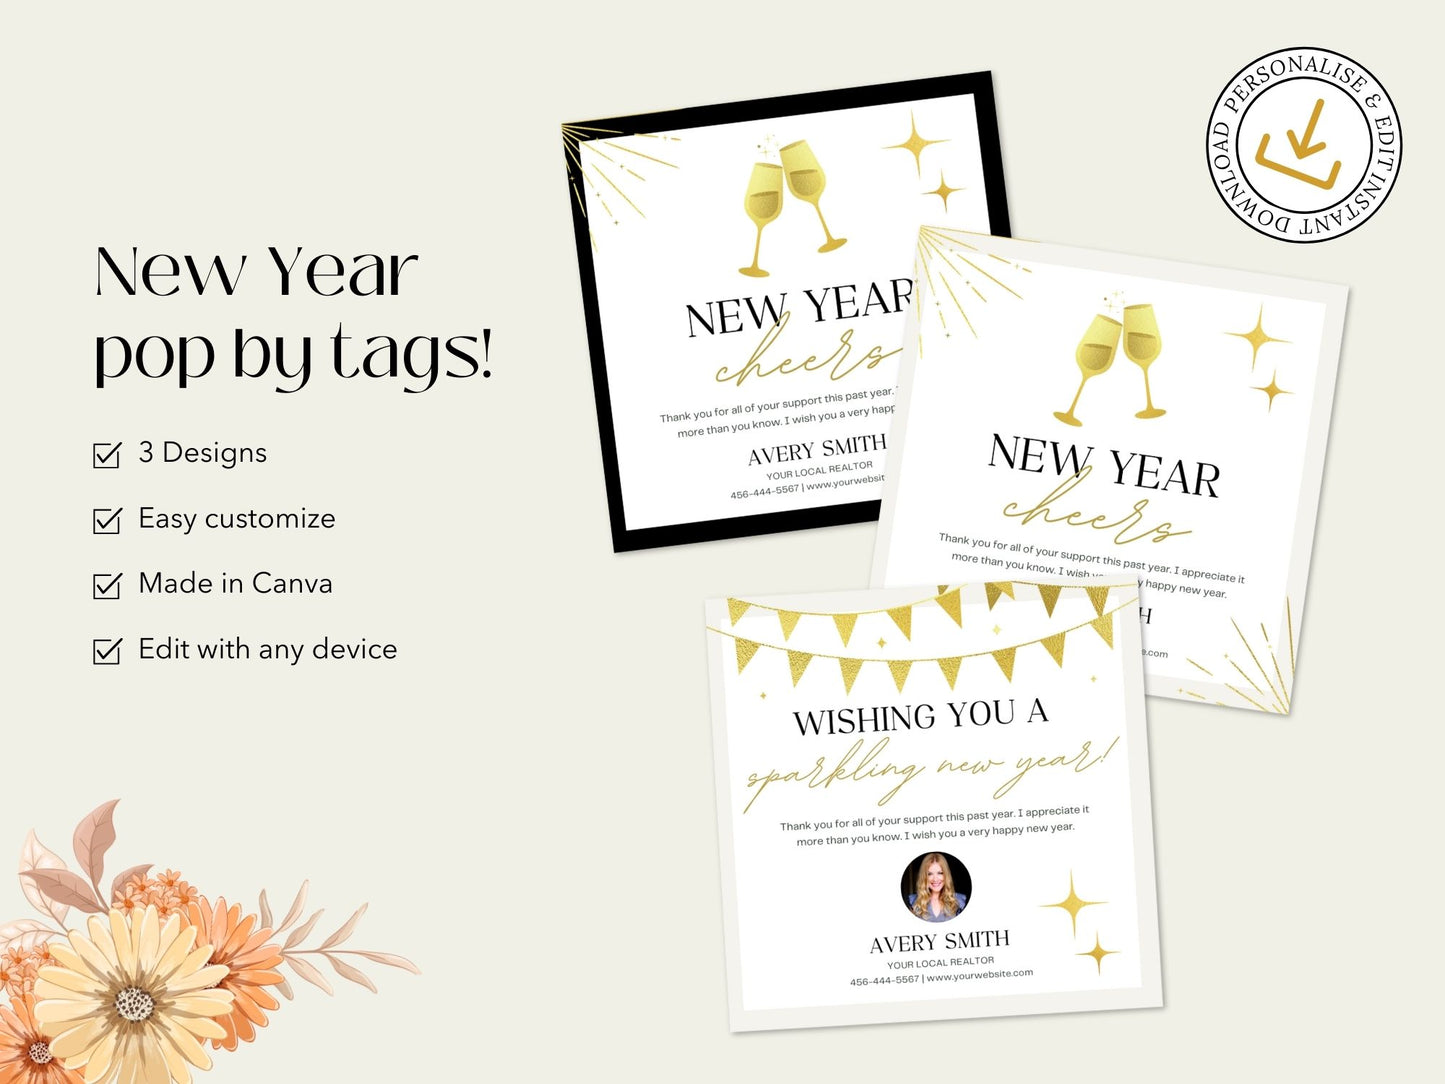 Real Estate New Year Pop By Tags Bundle - SQUARE: Spreading Festive New Year Cheer to Clients and the Community